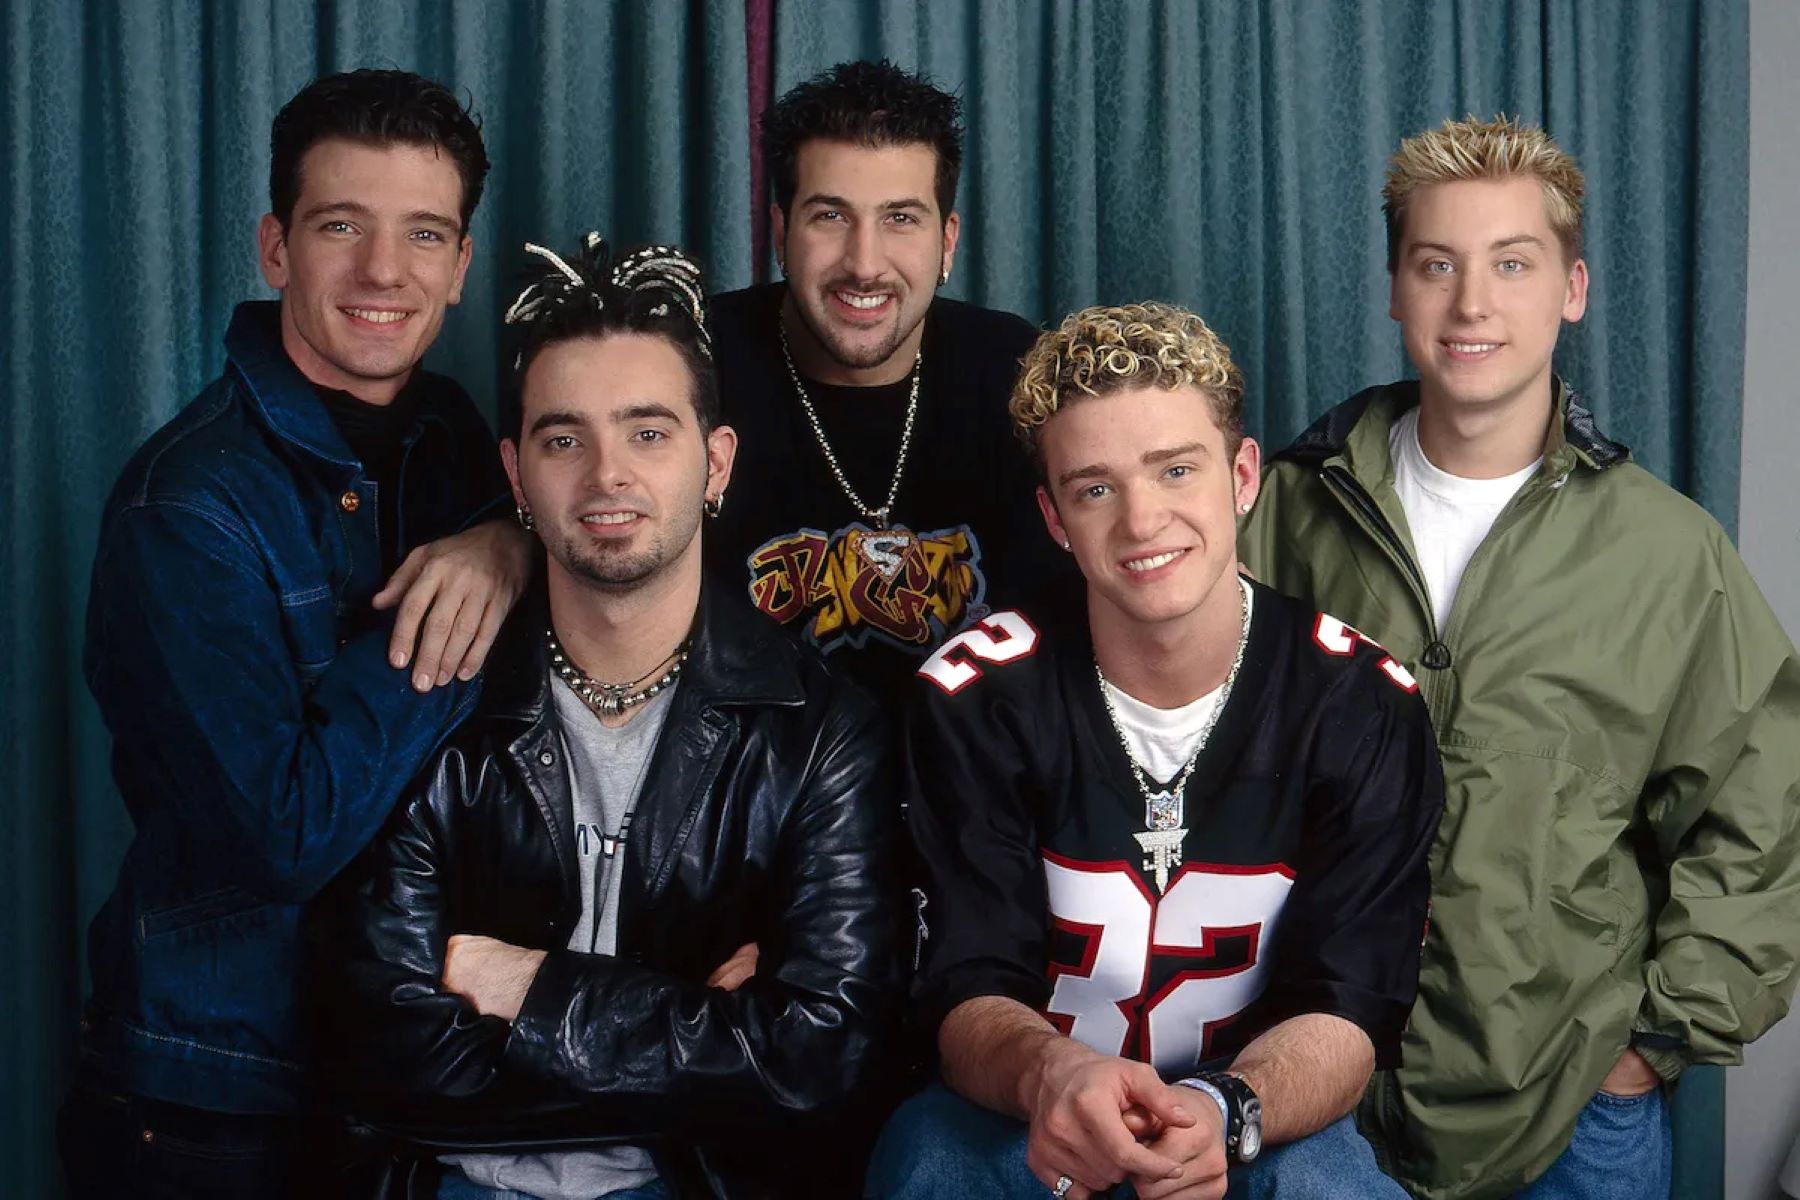 new-nsync-reunion-at-the-vmas-sparks-excitement